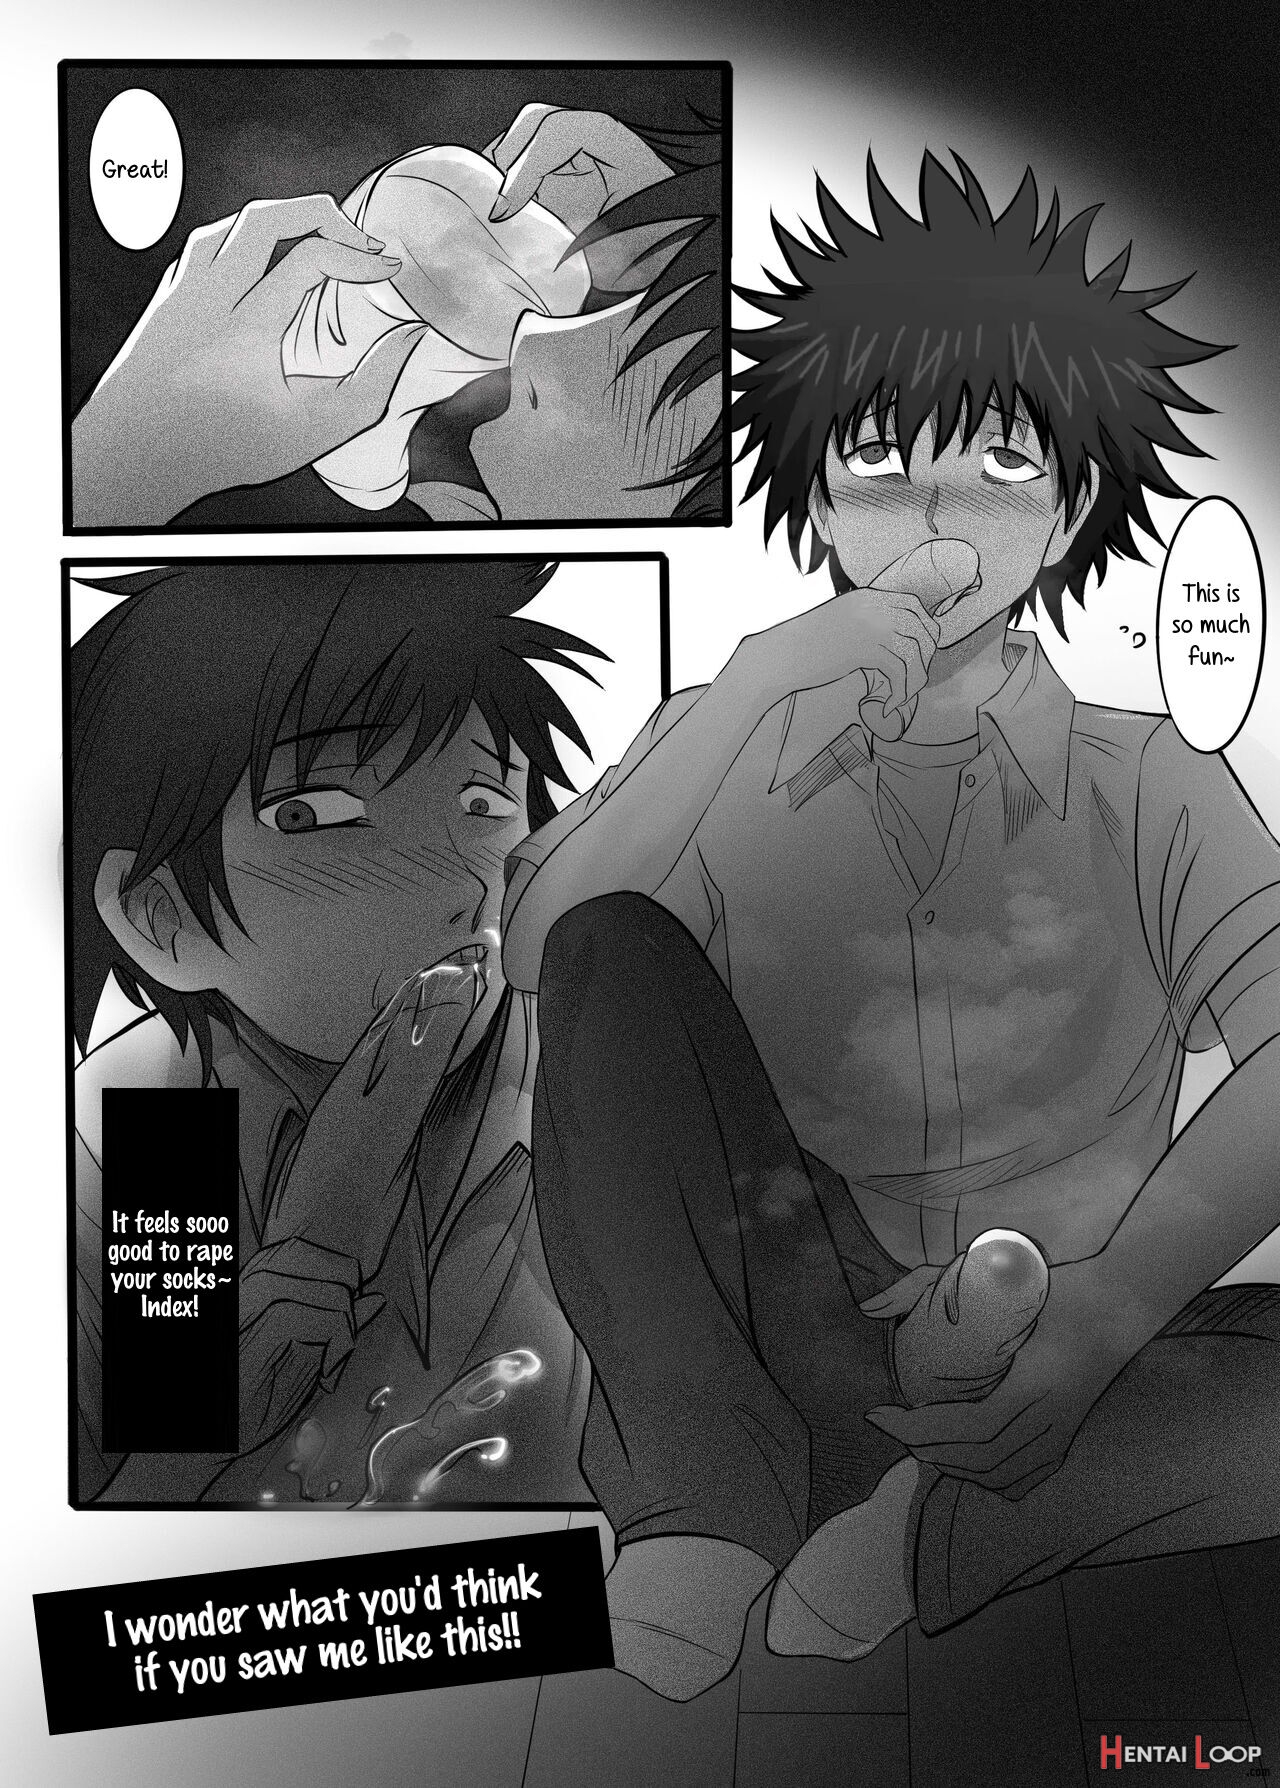 The Daily Life Of Index And Touma Every Night page 5